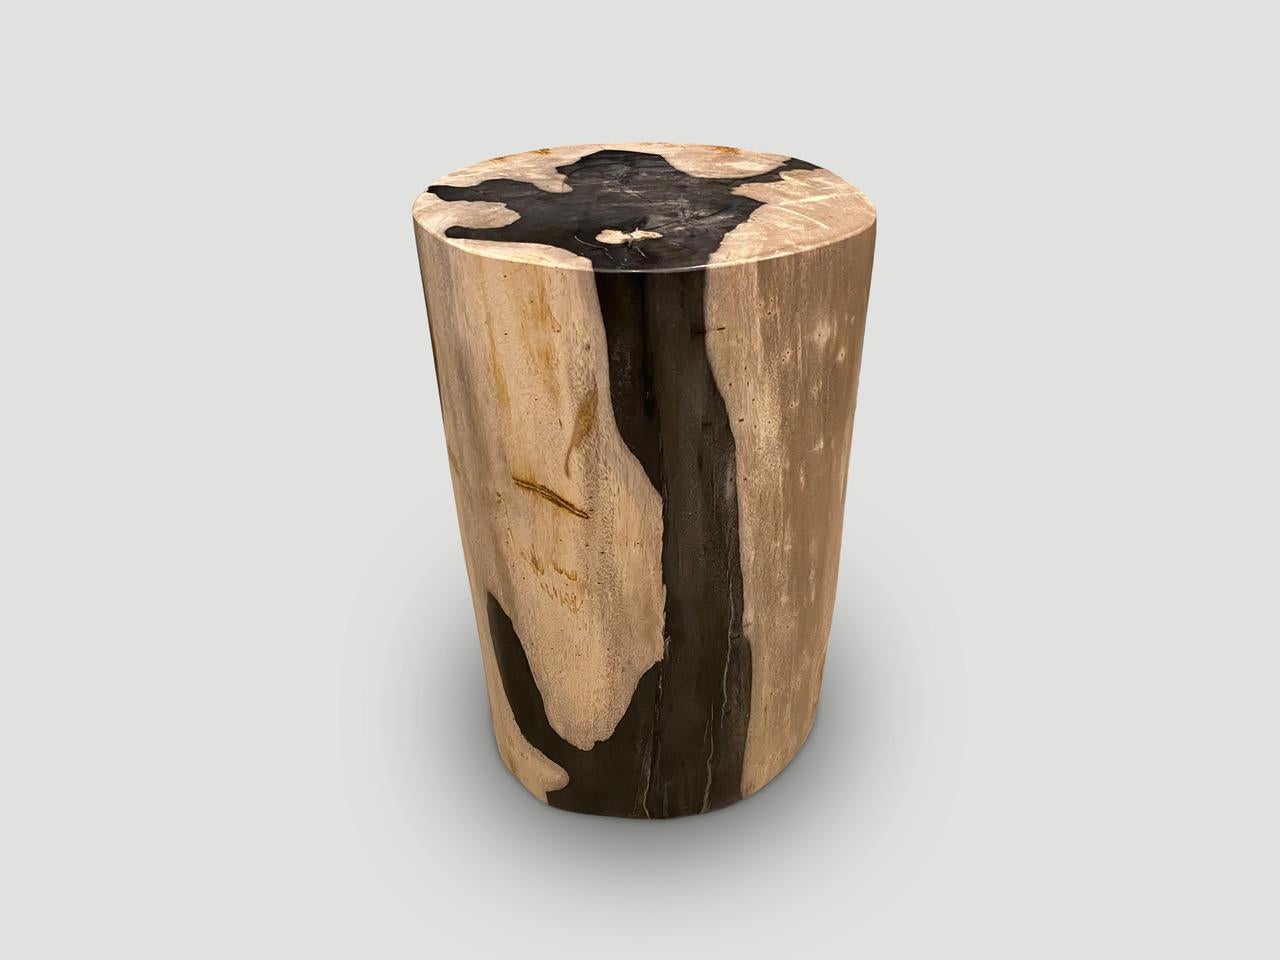 Beautiful petrified wood side table with fabulous contrasting markings reminiscent of a Matisse. It’s fascinating how Mother Nature produces these stunning 40 million year old petrified teak logs with such contrasting colors and natural patterns